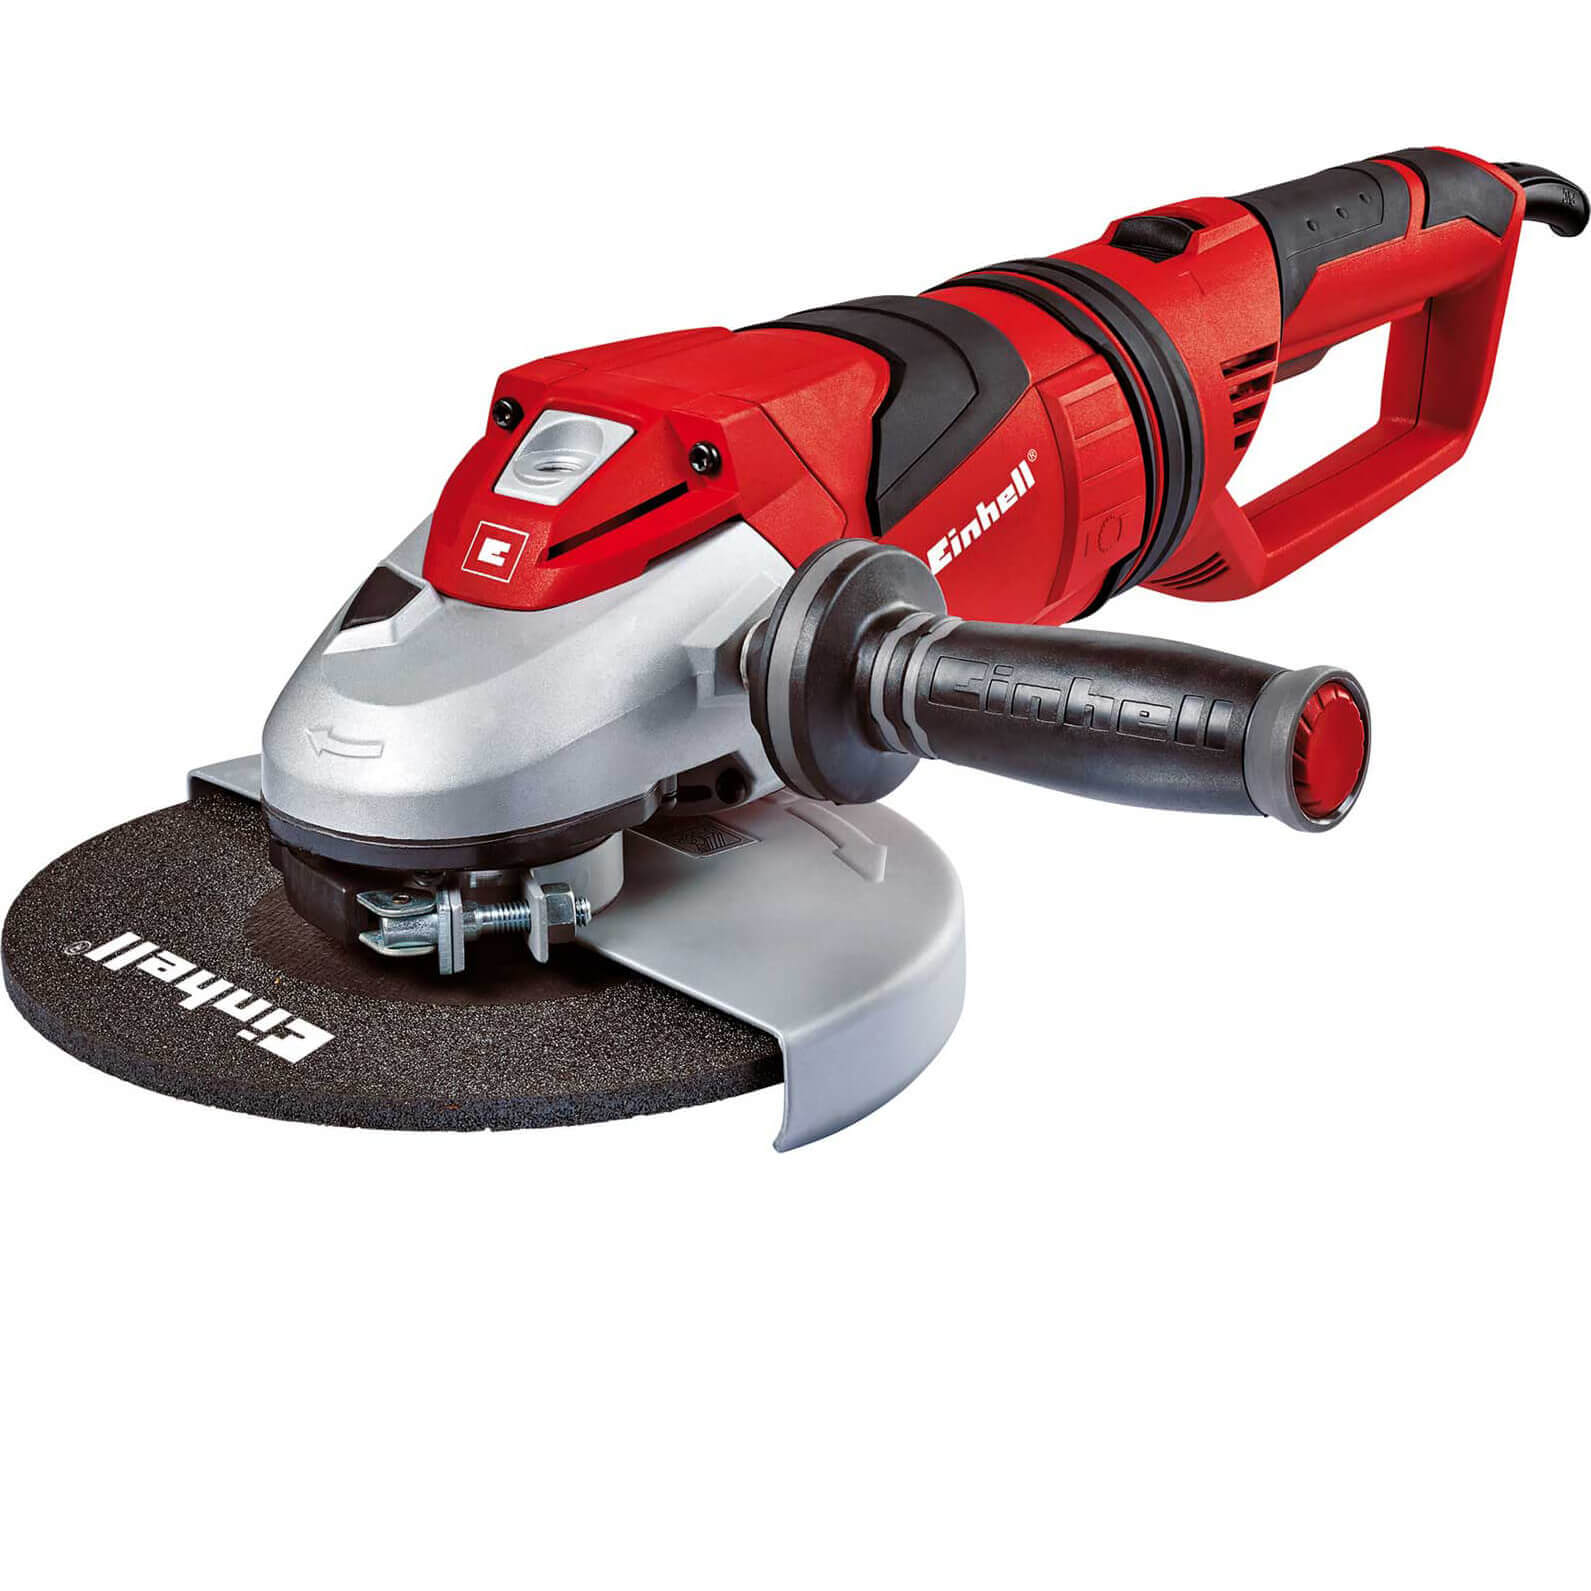 Photo of Einhell Te-ag 230 Angle Grinder 230mm